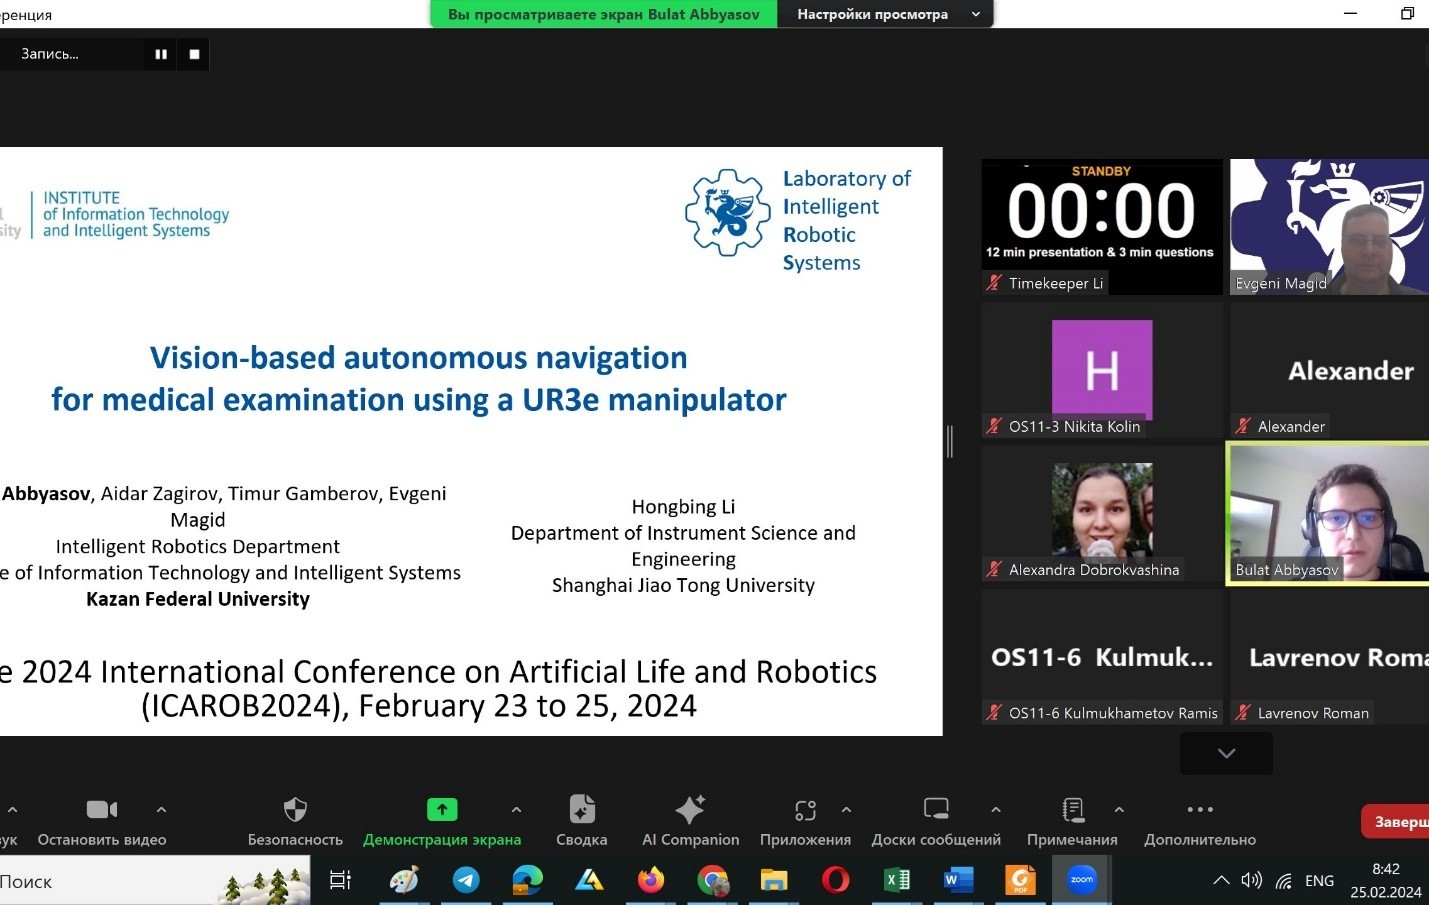 Laboratory of Intelligent Robotics Systems presented the results of scientific work at the International conference on artificial life and robotics ,ITIS, LIRS, robotics